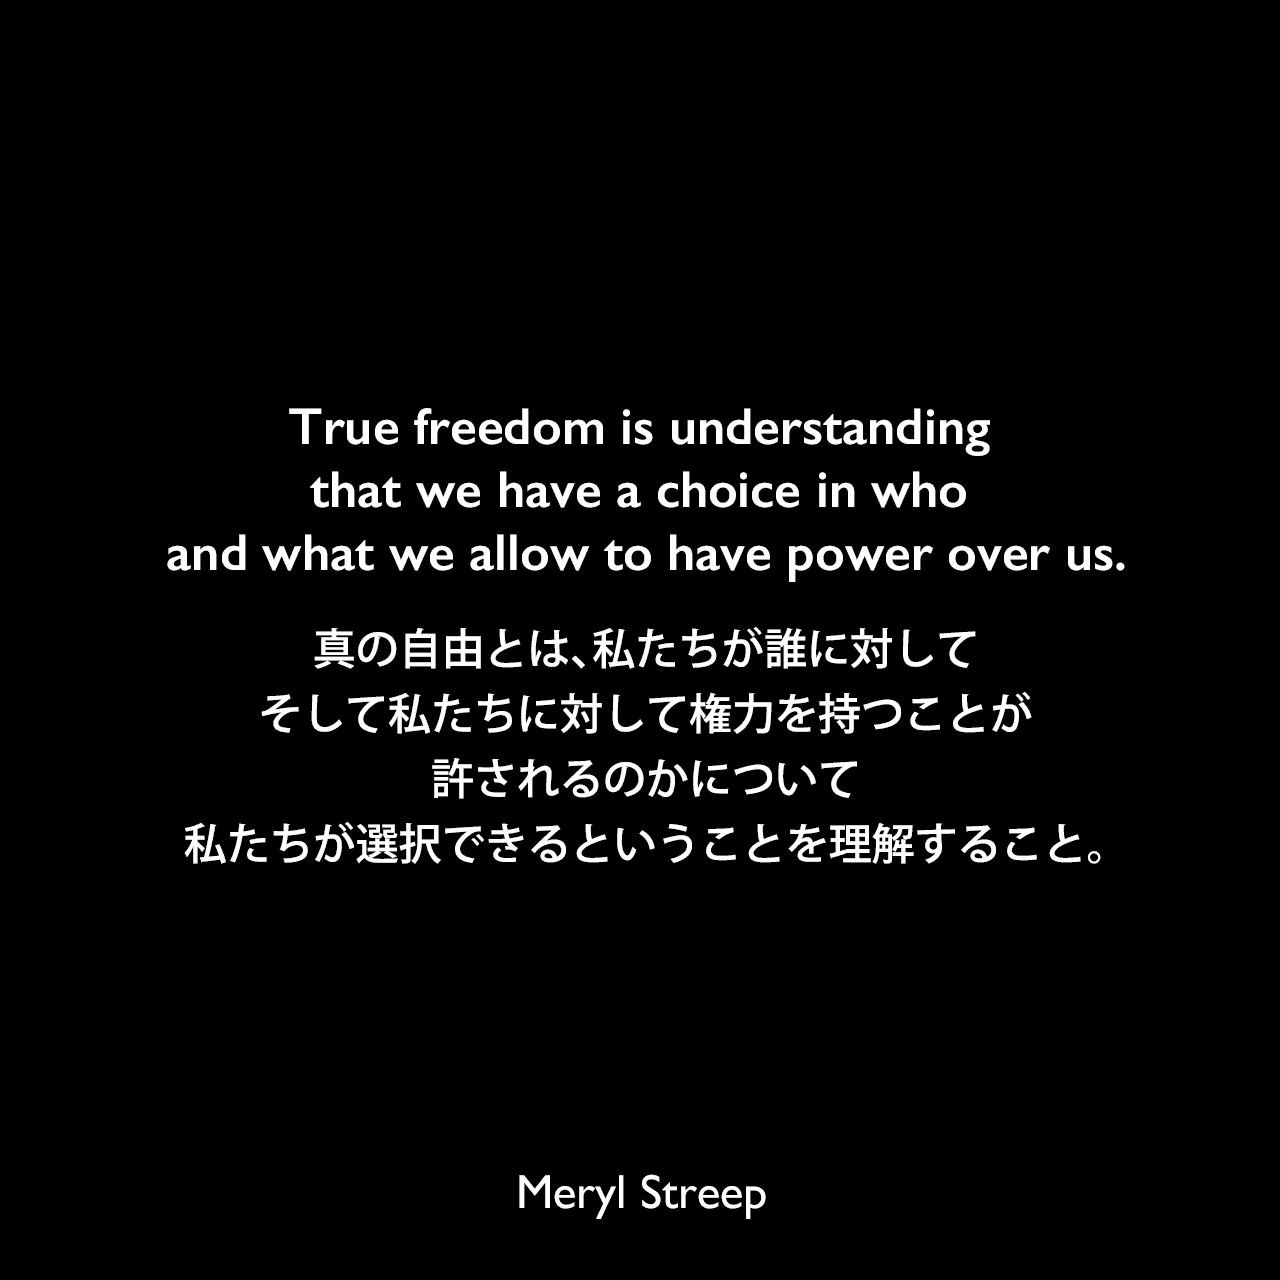 True freedom is understanding that we have a choice in who and what we allow to have power over us.真の自由とは、私たちが誰に対して、そして私たちに対して権力を持つことが許されるのかについて私たちが選択できるということを理解すること。Meryl Streep